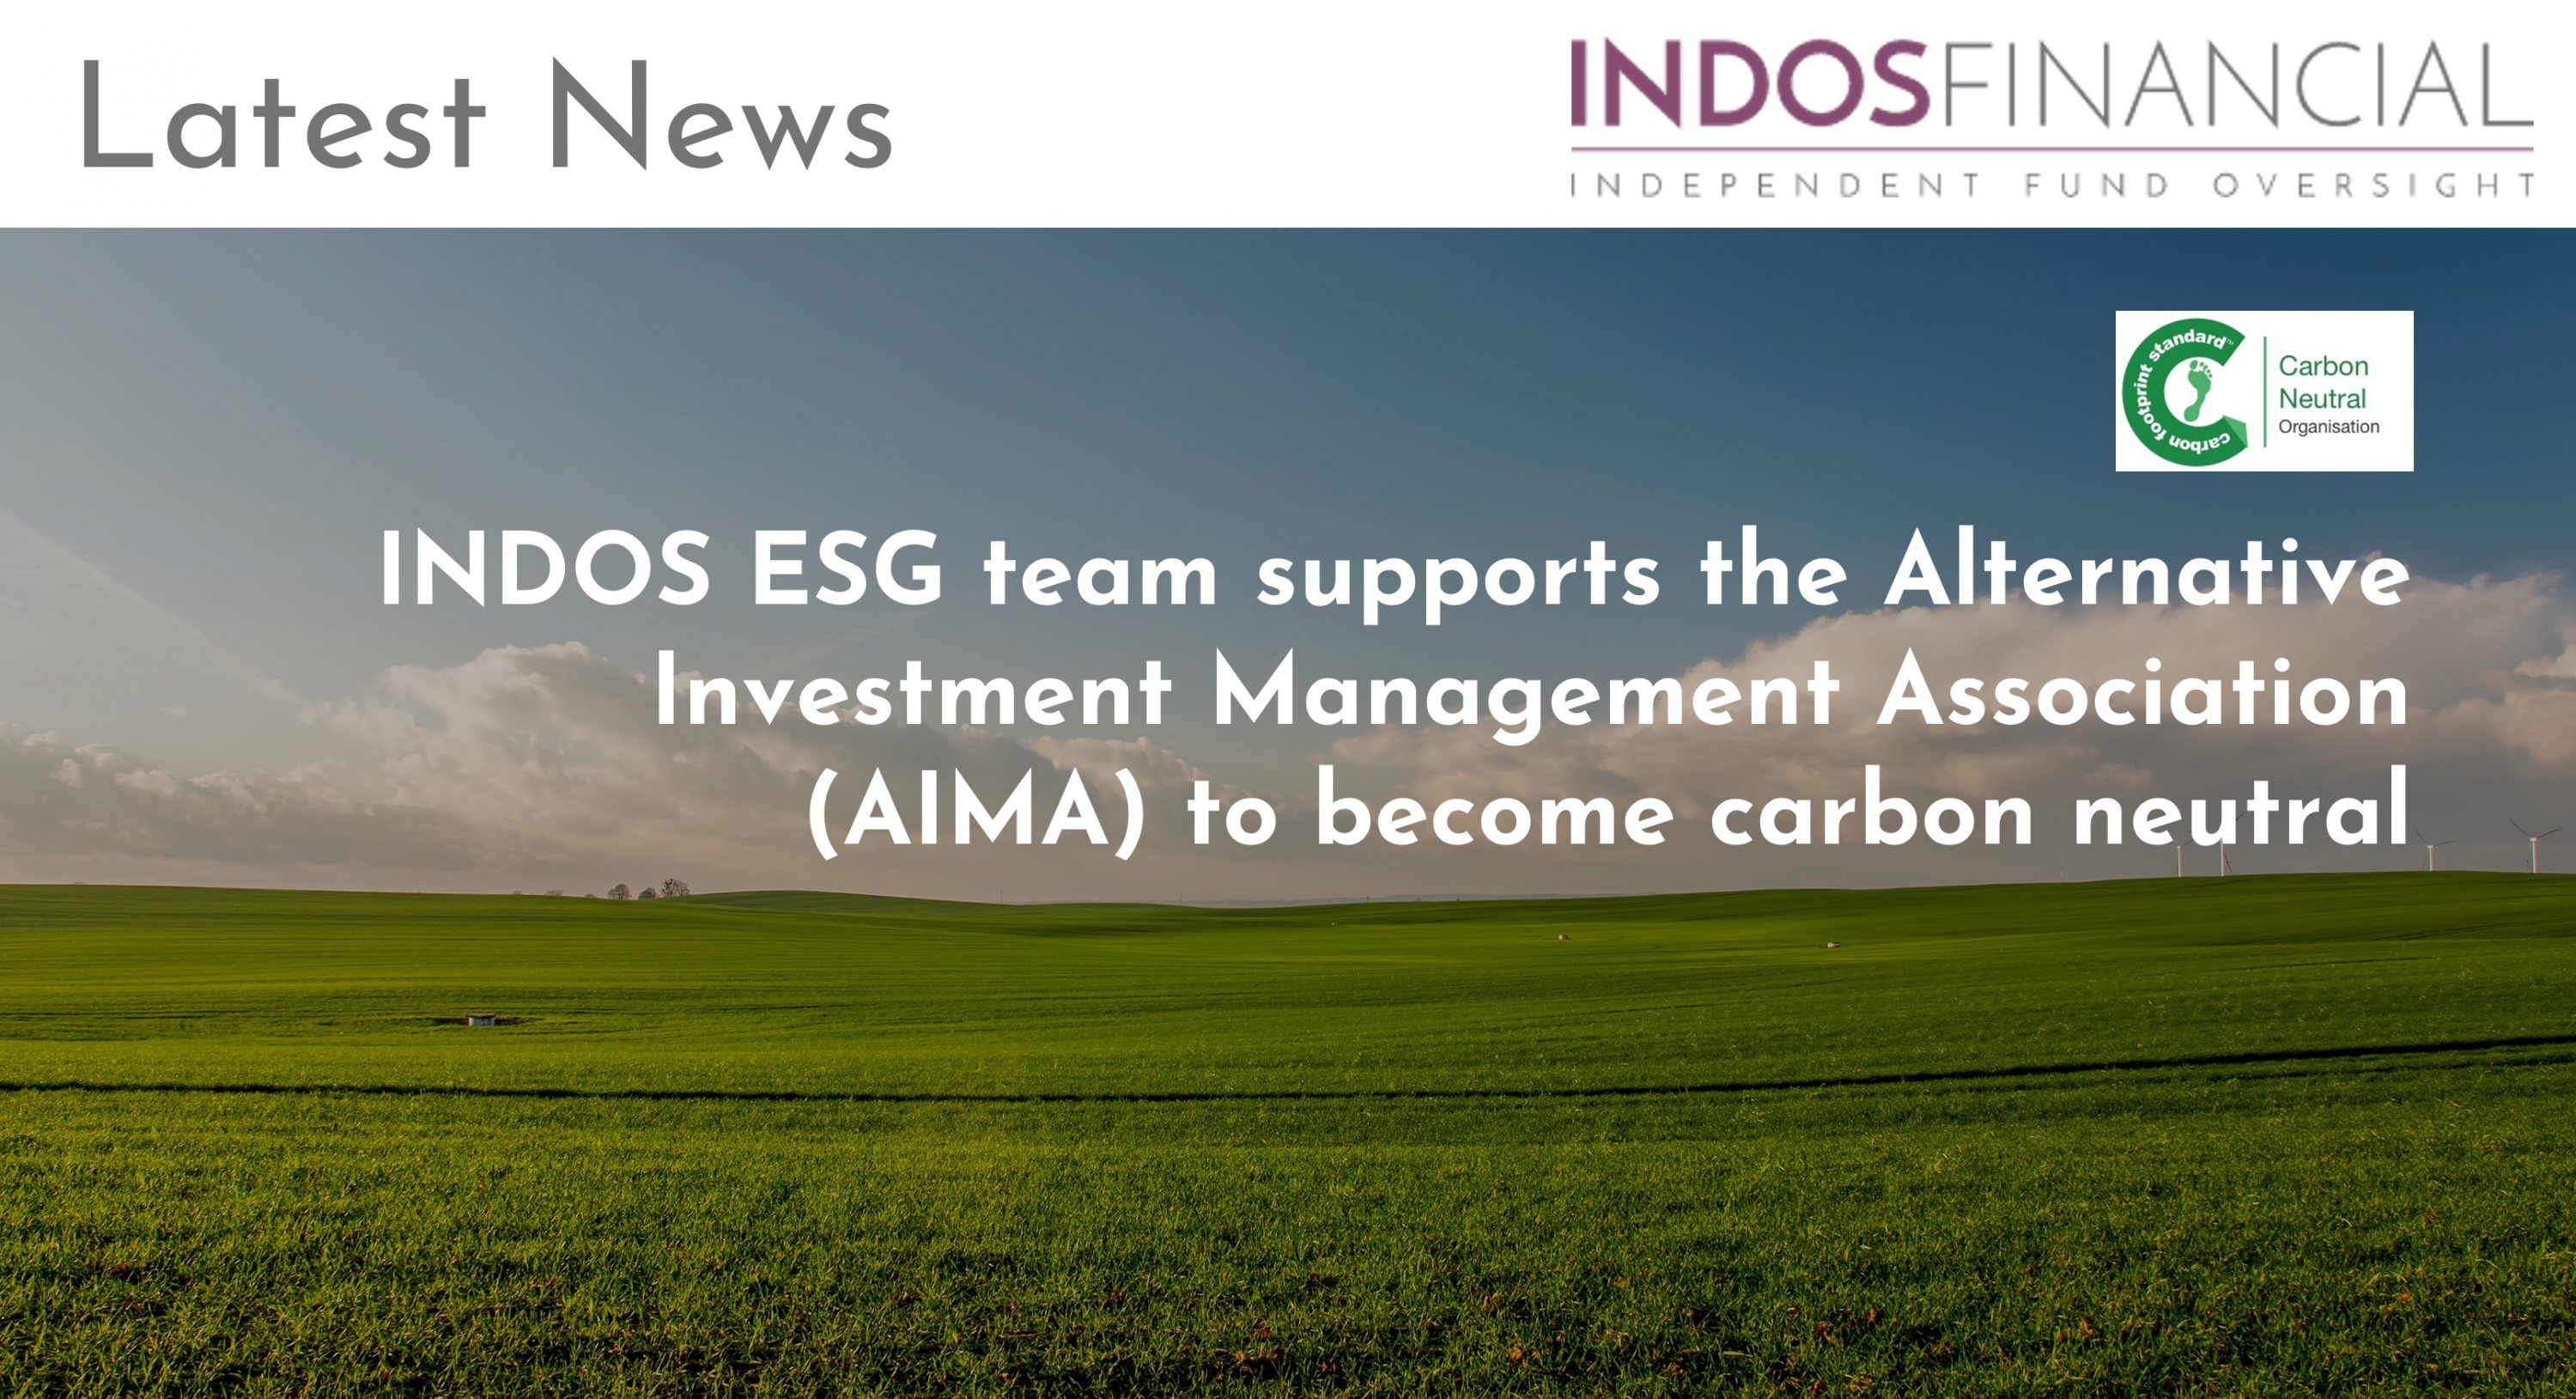 AIMA-becomes-Carbon-Neutral